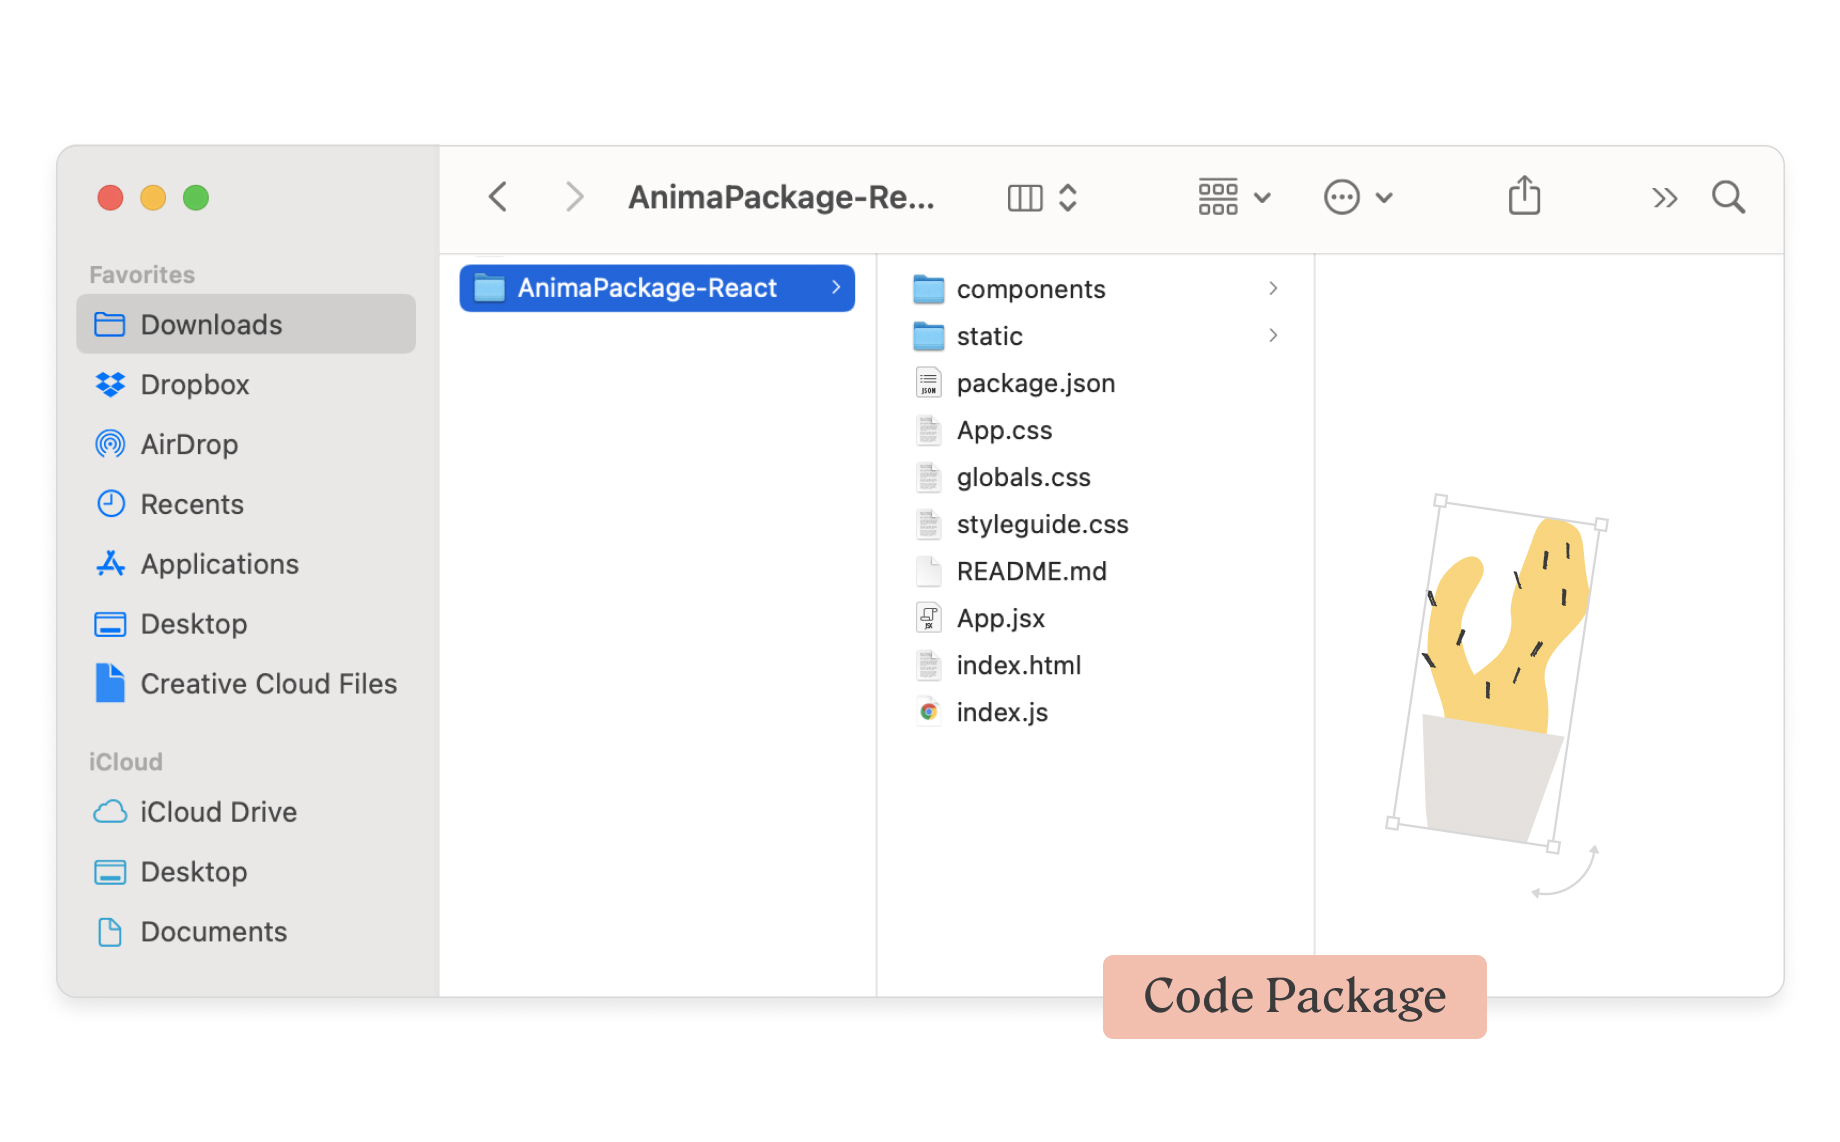 Anima’s code package: What you get